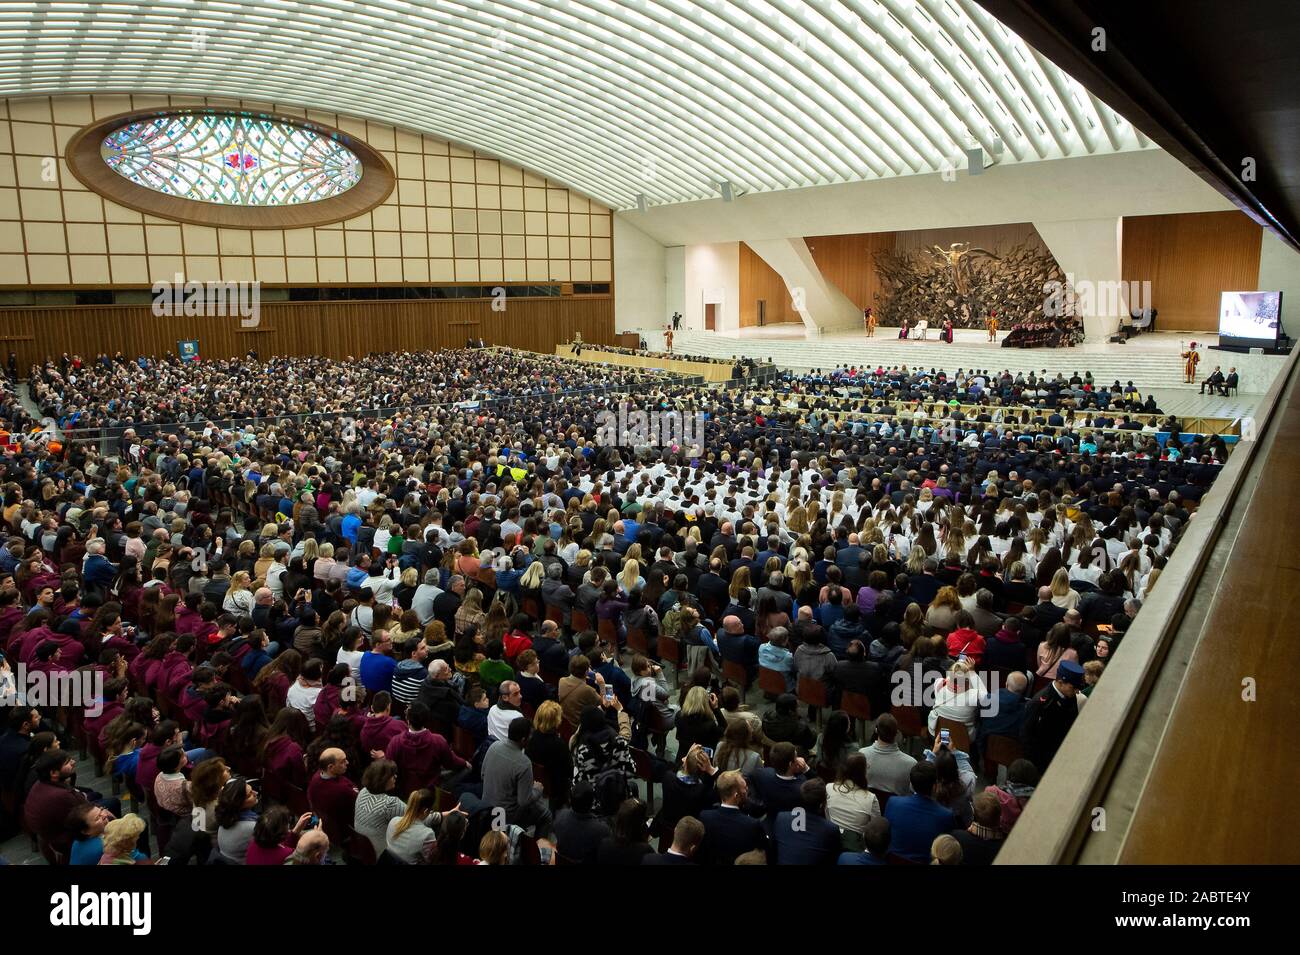 A General view of Paul VI Hall during Pope Francis's weekly general audience in Paul VI hall at the Vatican. Stock Photo